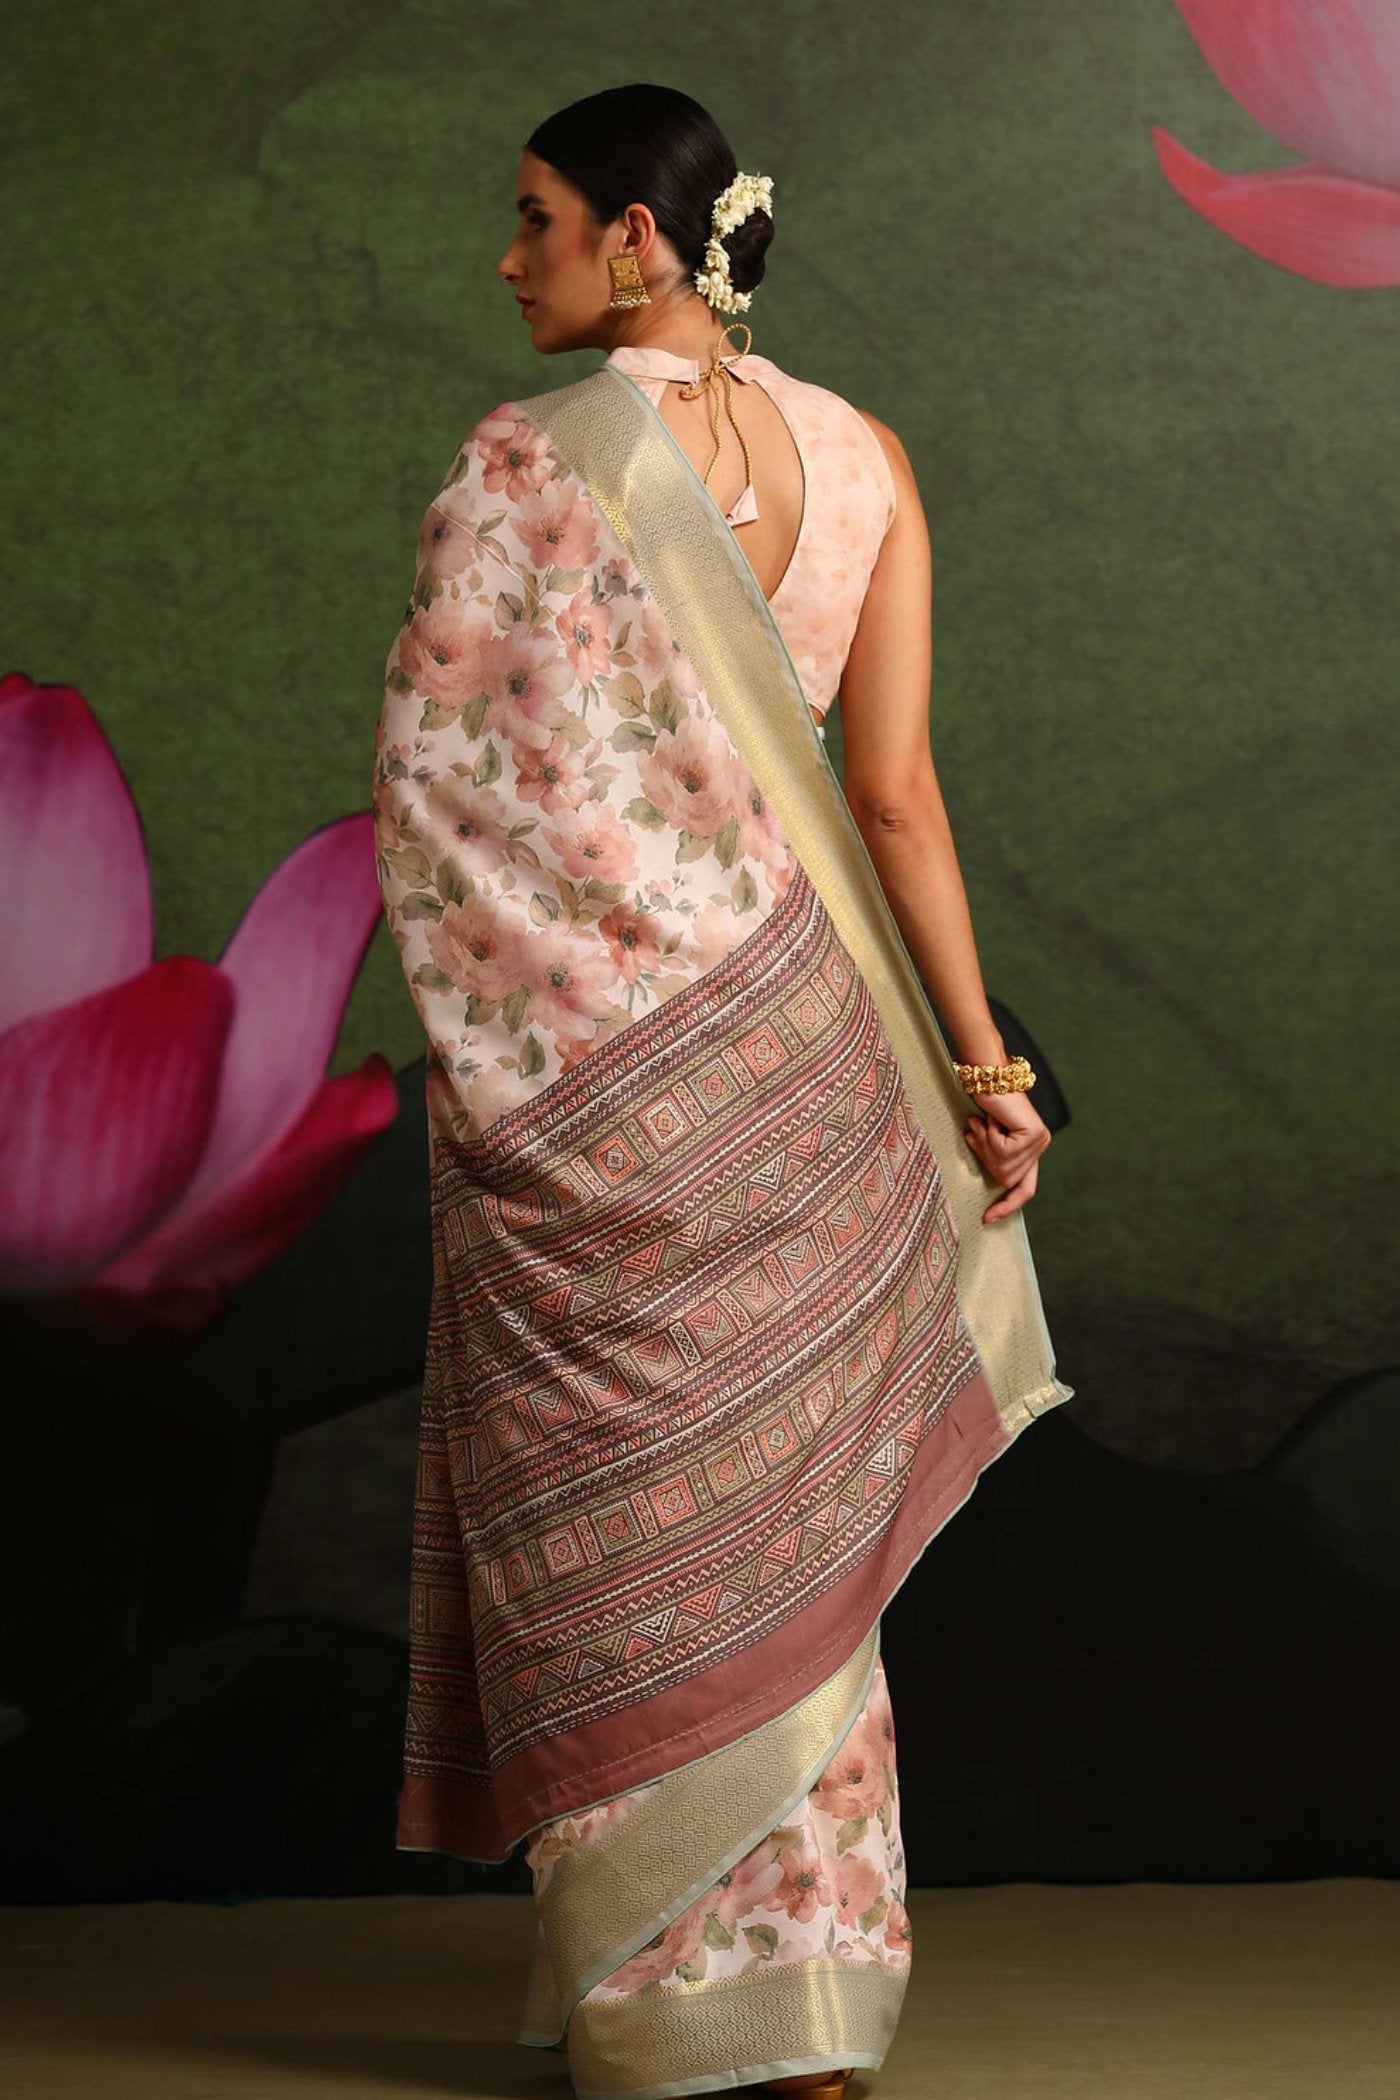 Buy MySilkLove Tacao Peach and Cream Floral Printed Saree Online